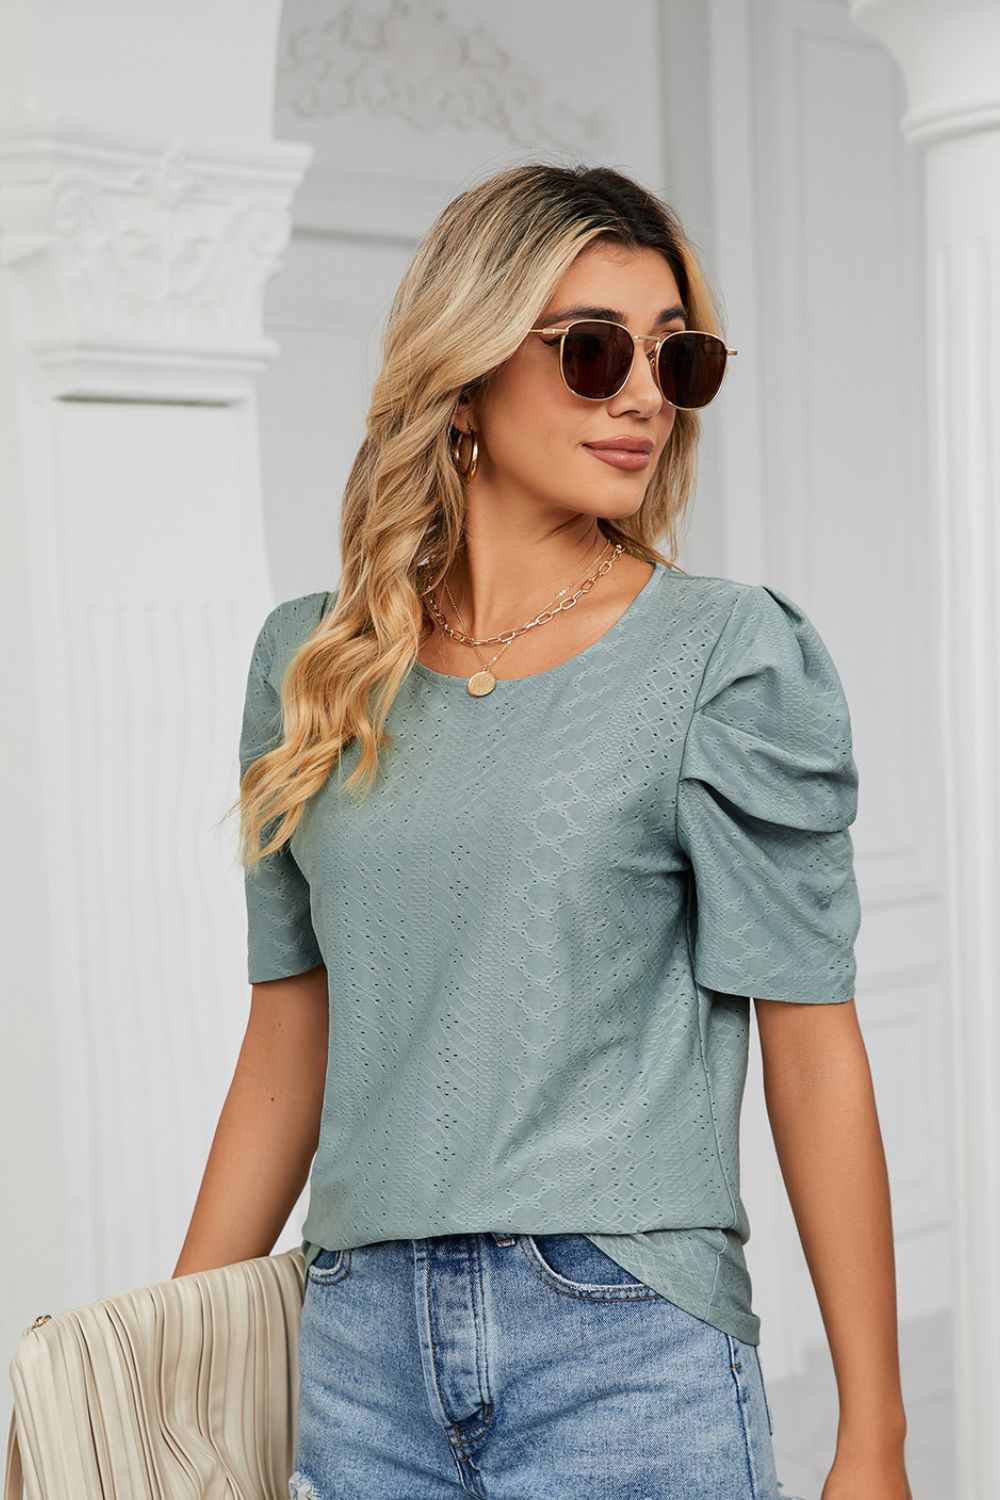 Why Not Me Eyelet Puff Sleeve Top - teal short sleeve top with puff sleeves and round neck #Firefly Lane Boutique1